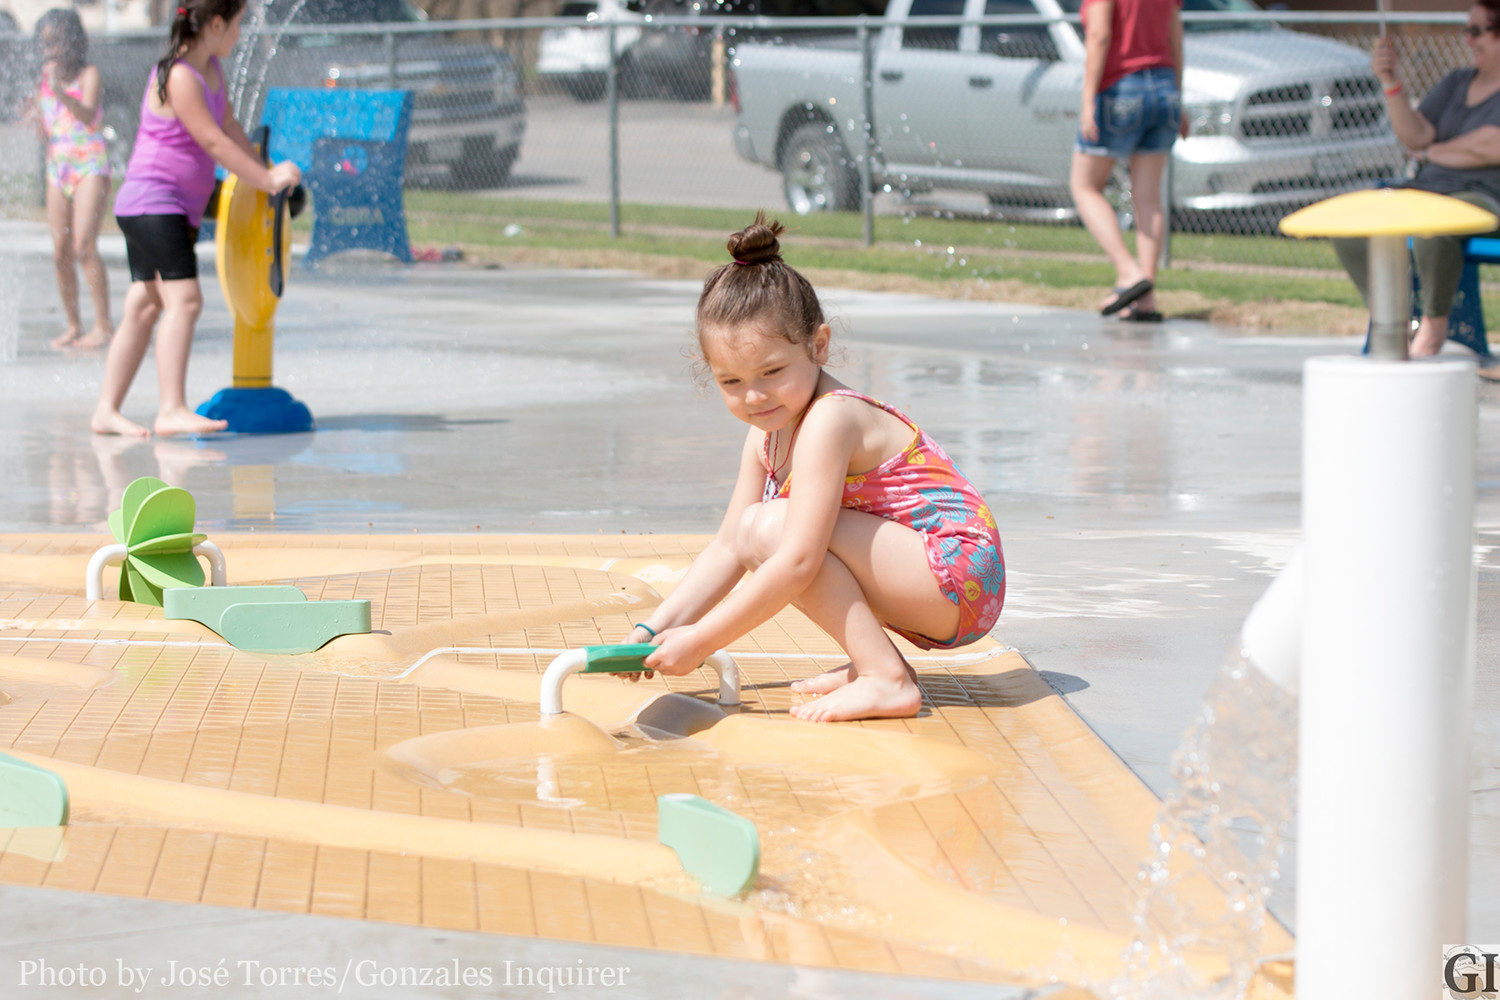 This curious splash pad toddler walks toward the “Water Journey” piece where users can manipulate water to show the life-like stream behavior.